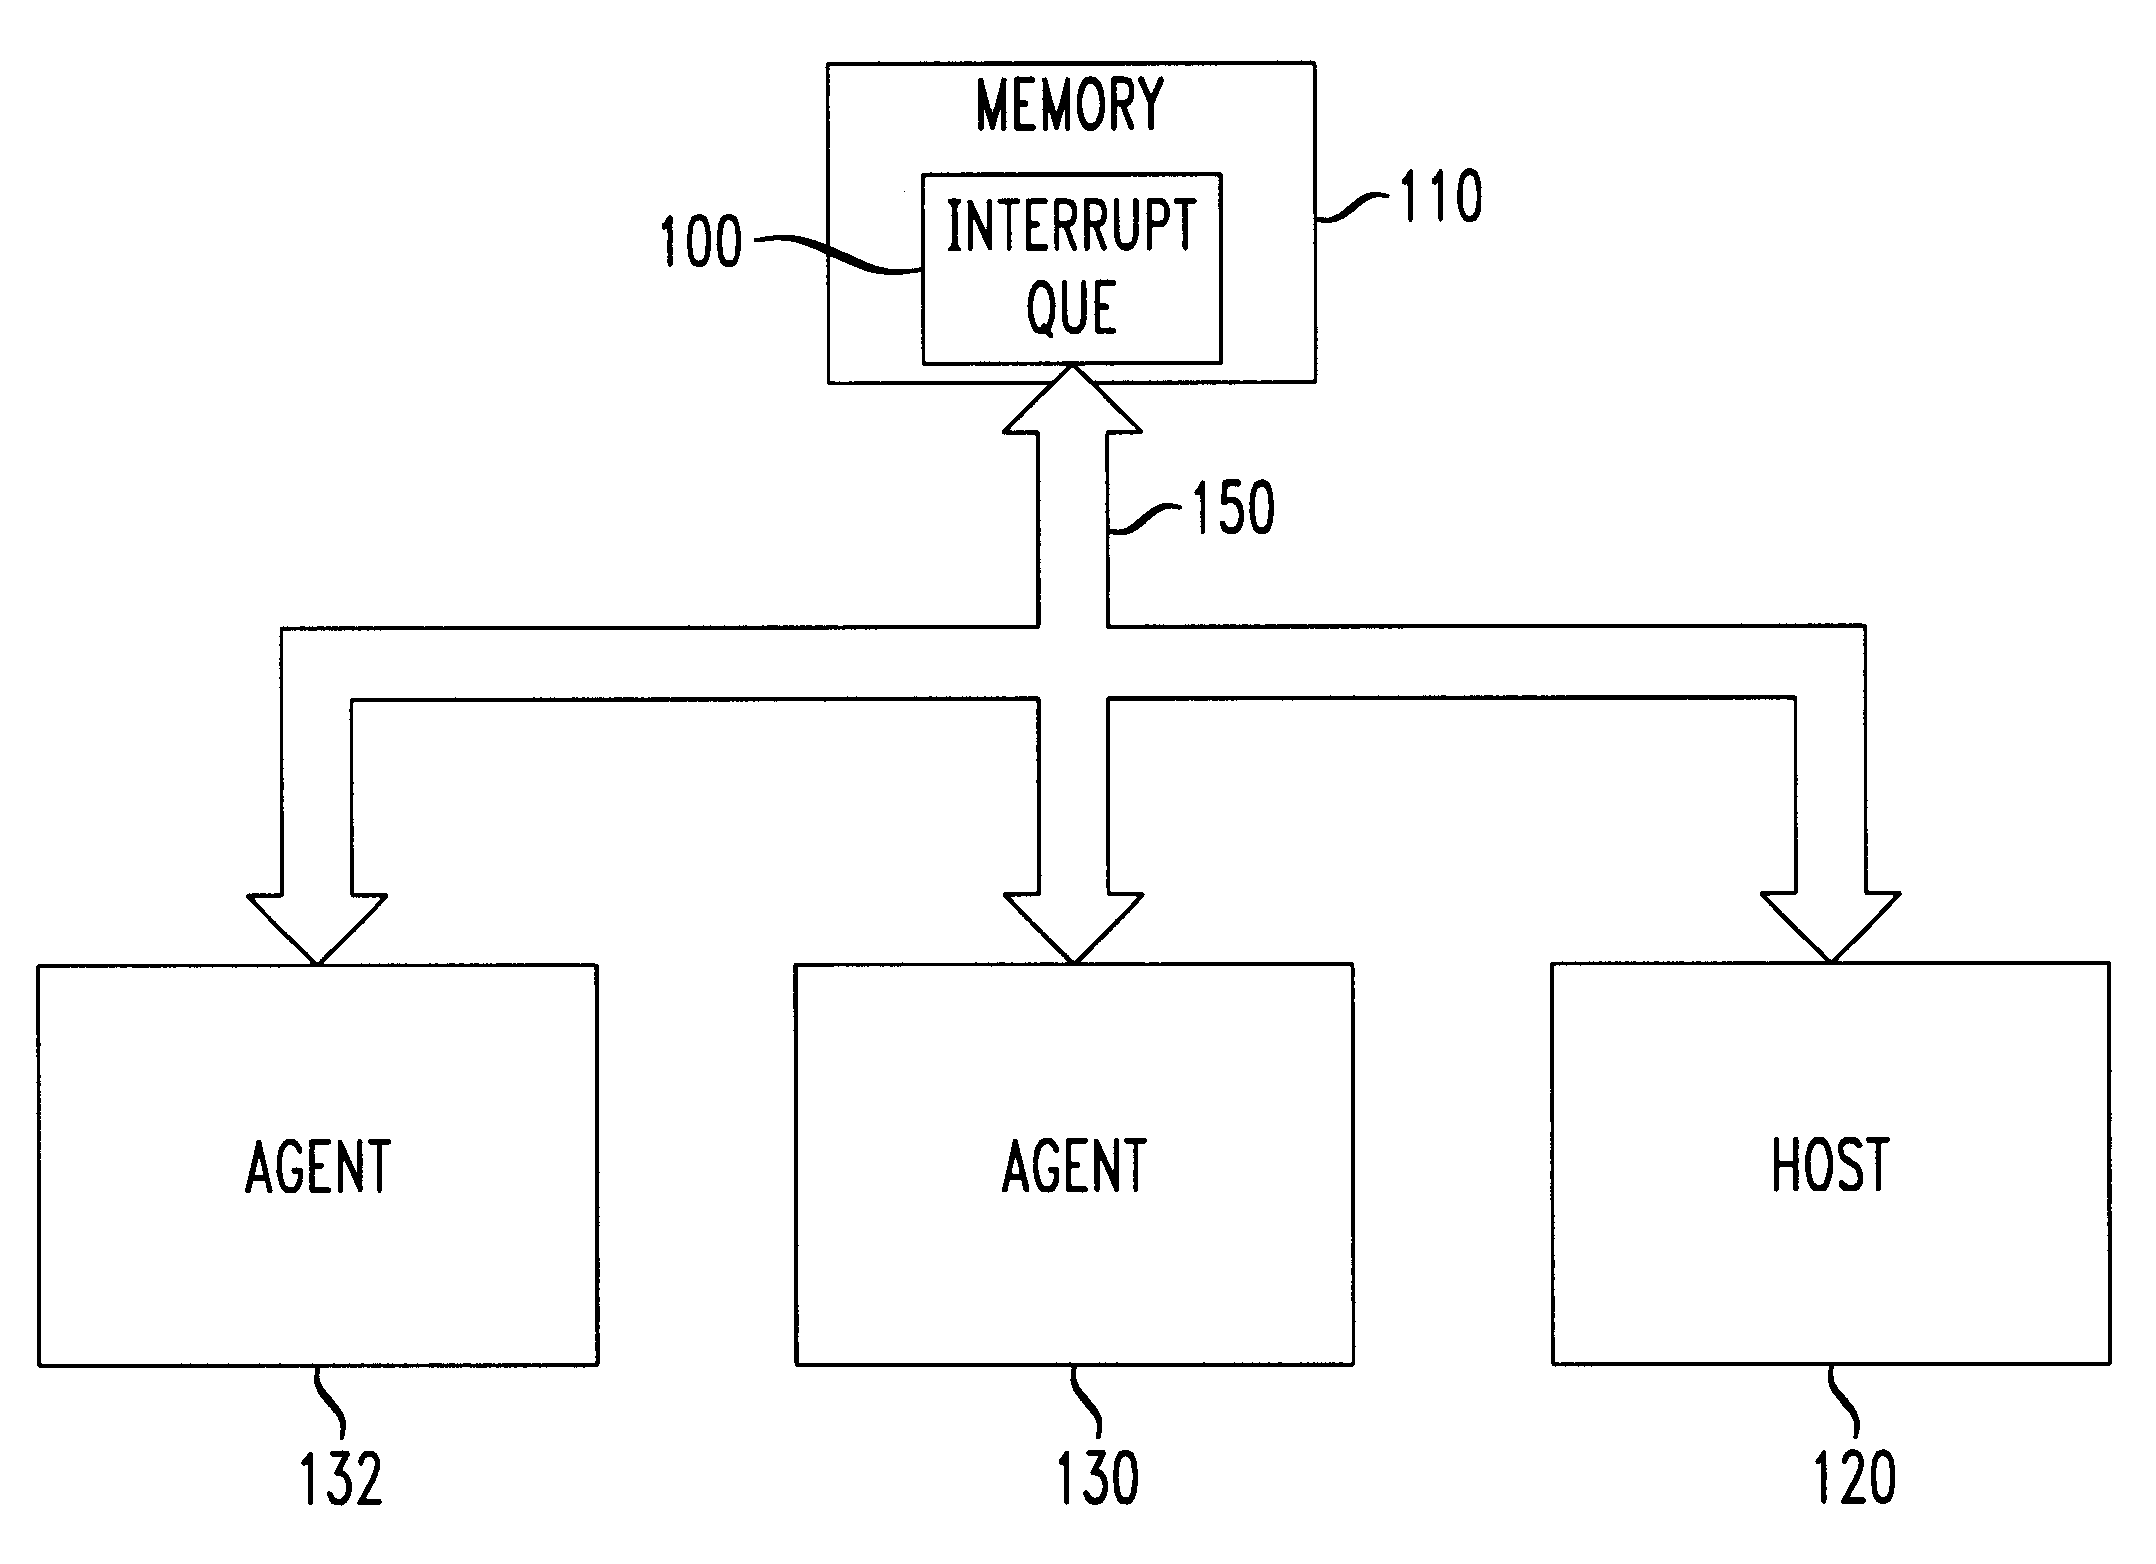 System for memory based interrupt queue in a memory of a multiprocessor system